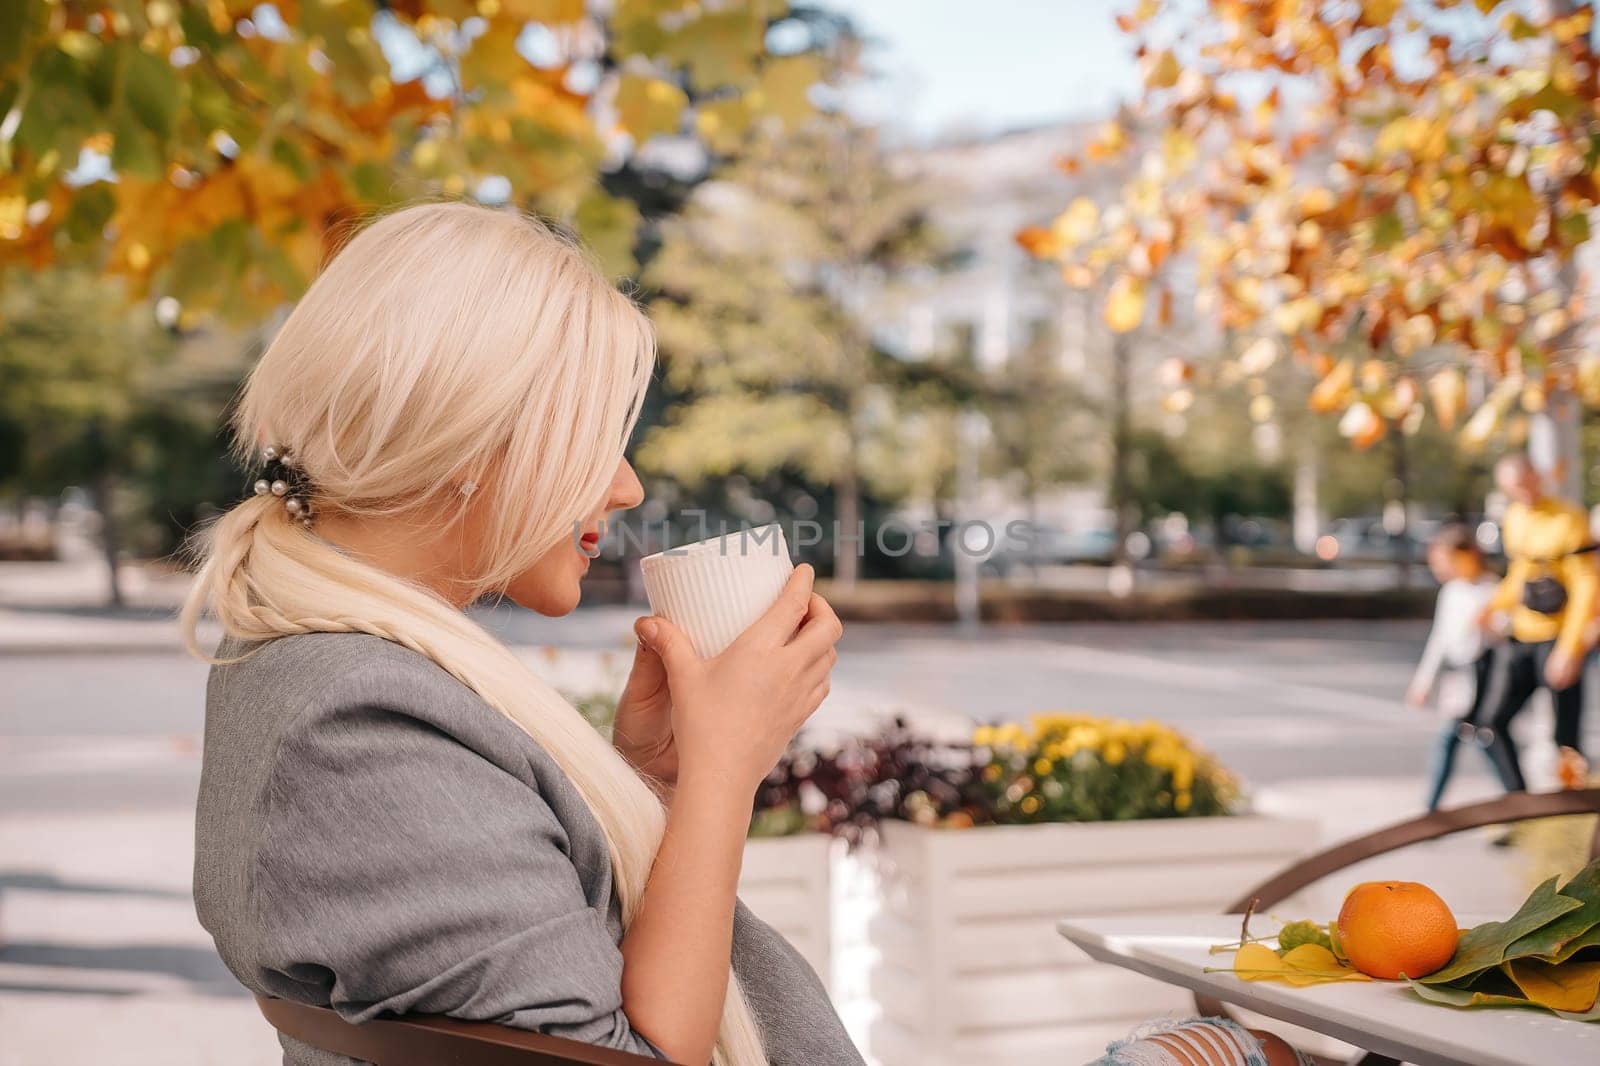 A blonde woman is drinking coffee while sitting under a tree. The scene is peaceful and relaxing, with the woman enjoying her coffee and the natural surroundings. by Matiunina